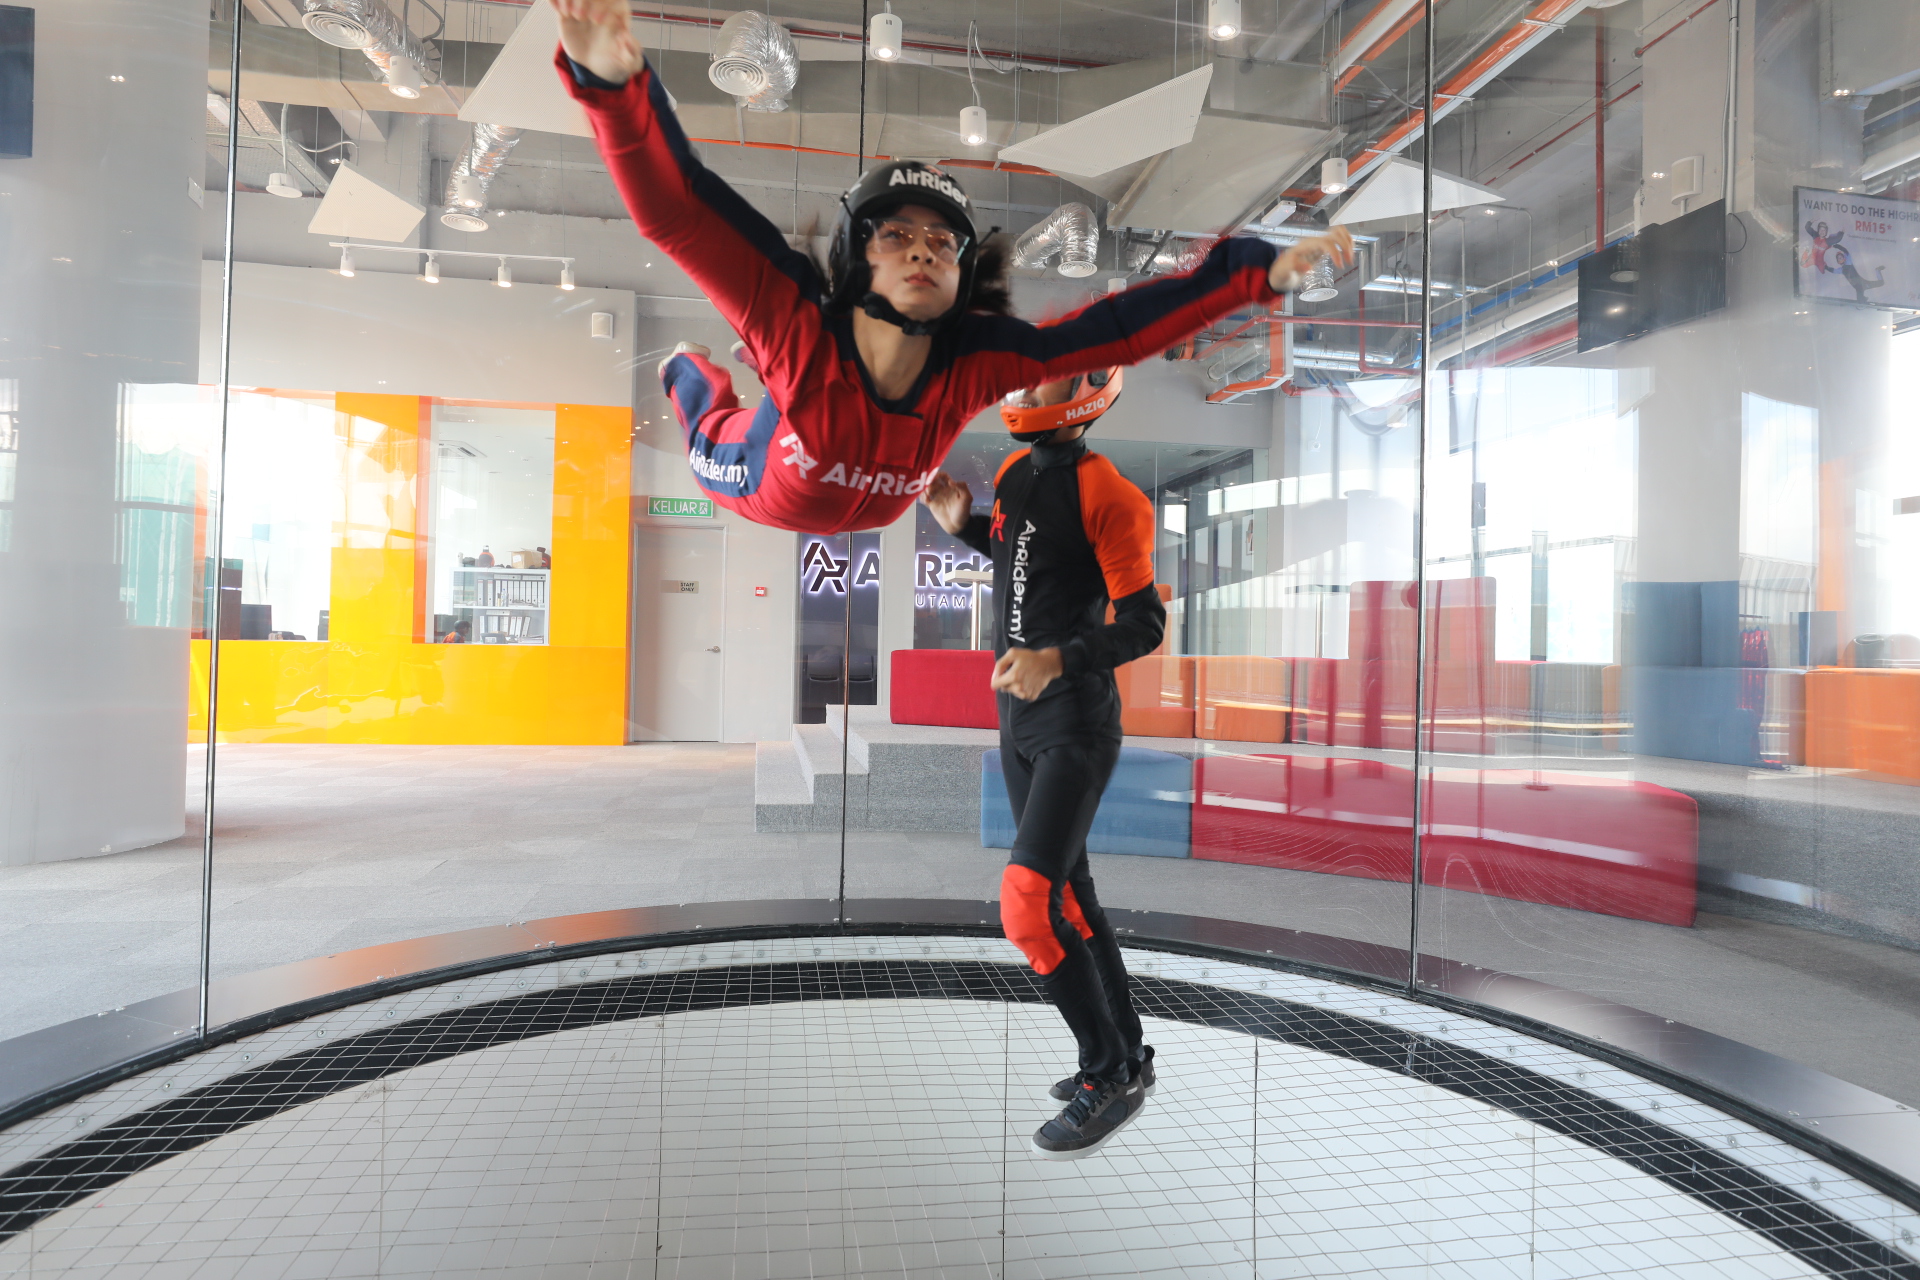 Leave your gym. Indoor skydiving is the new workout.